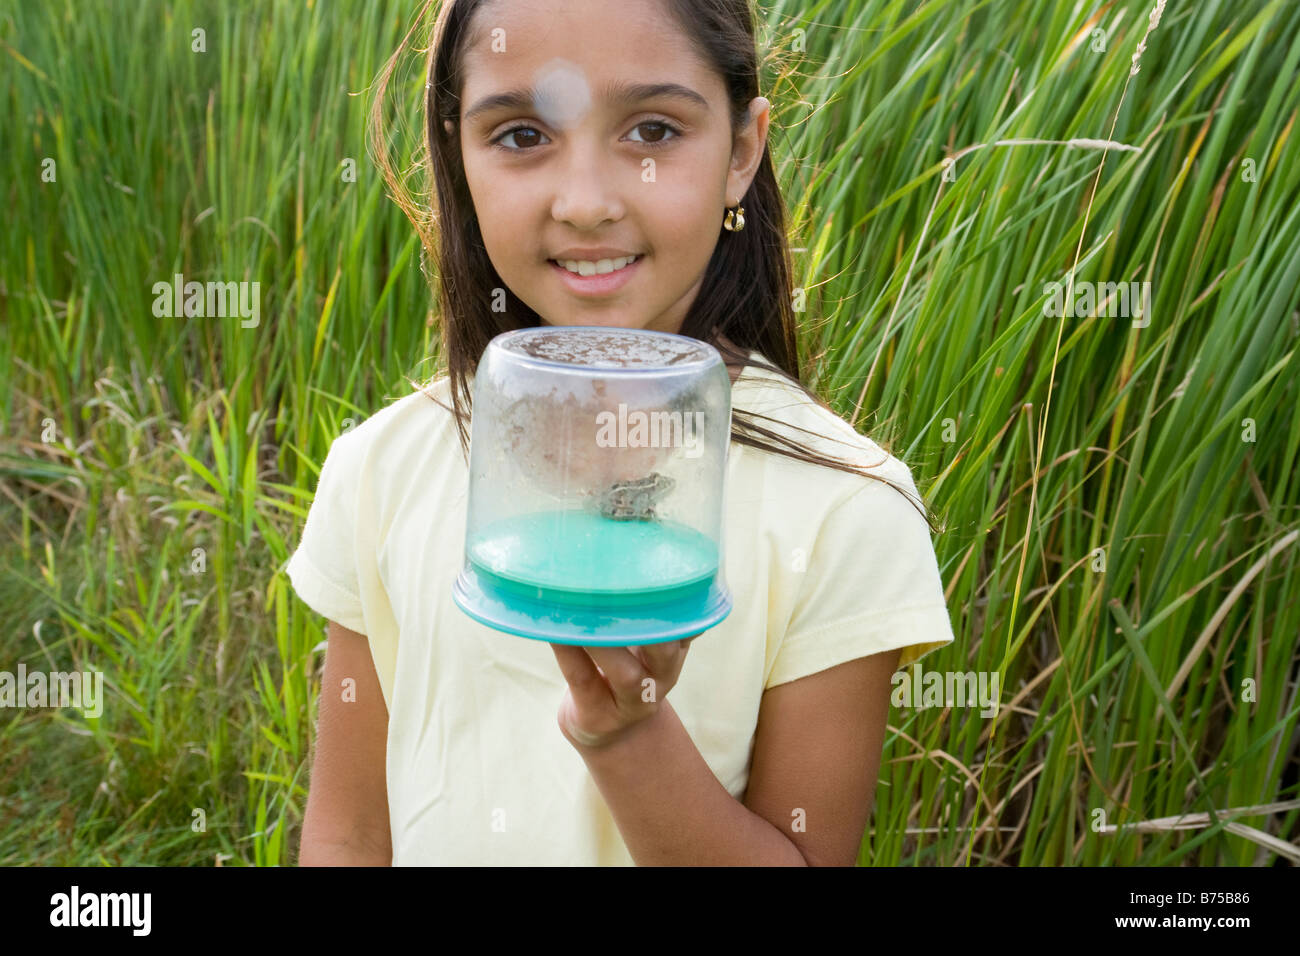 8 year old girl in wetland holding frog in collecting jar, Winnipeg, Canada Stock Photo